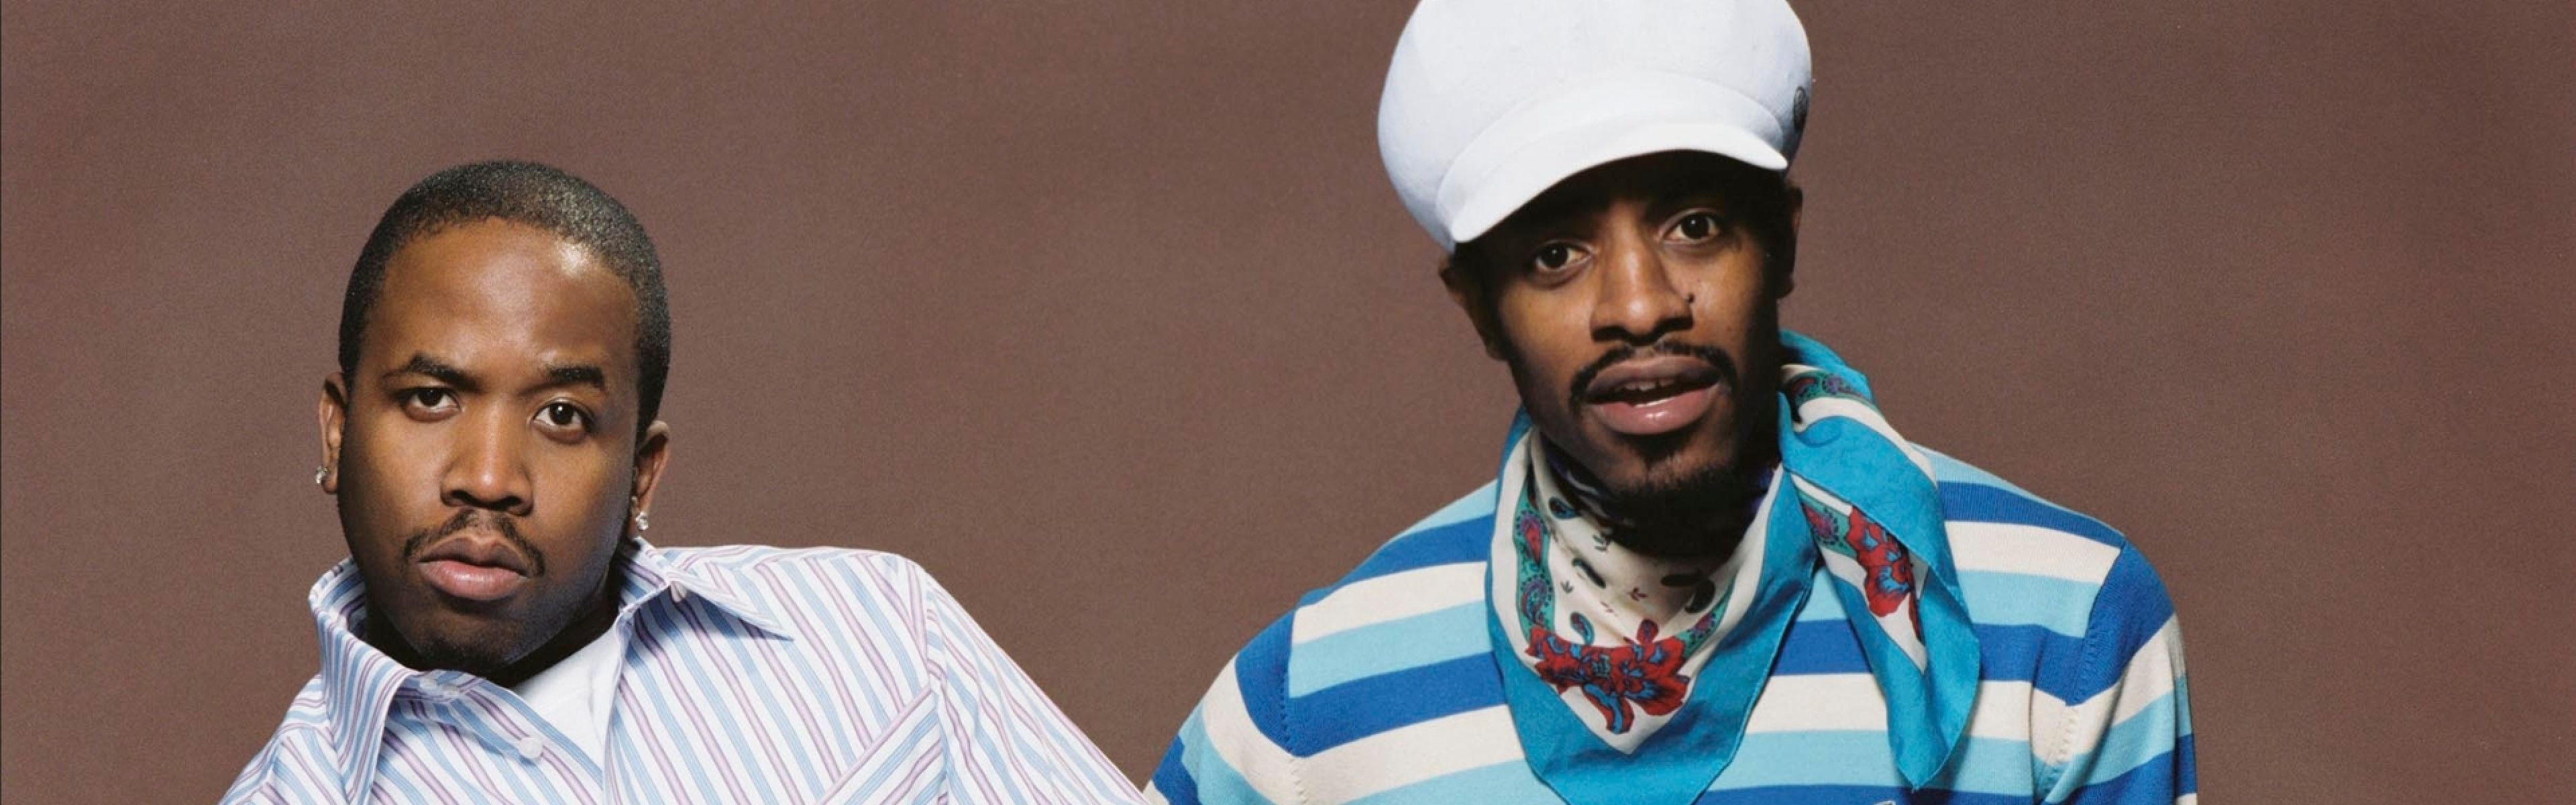 Outkast Wallpaper posted by Michelle Thompson 3840x1200